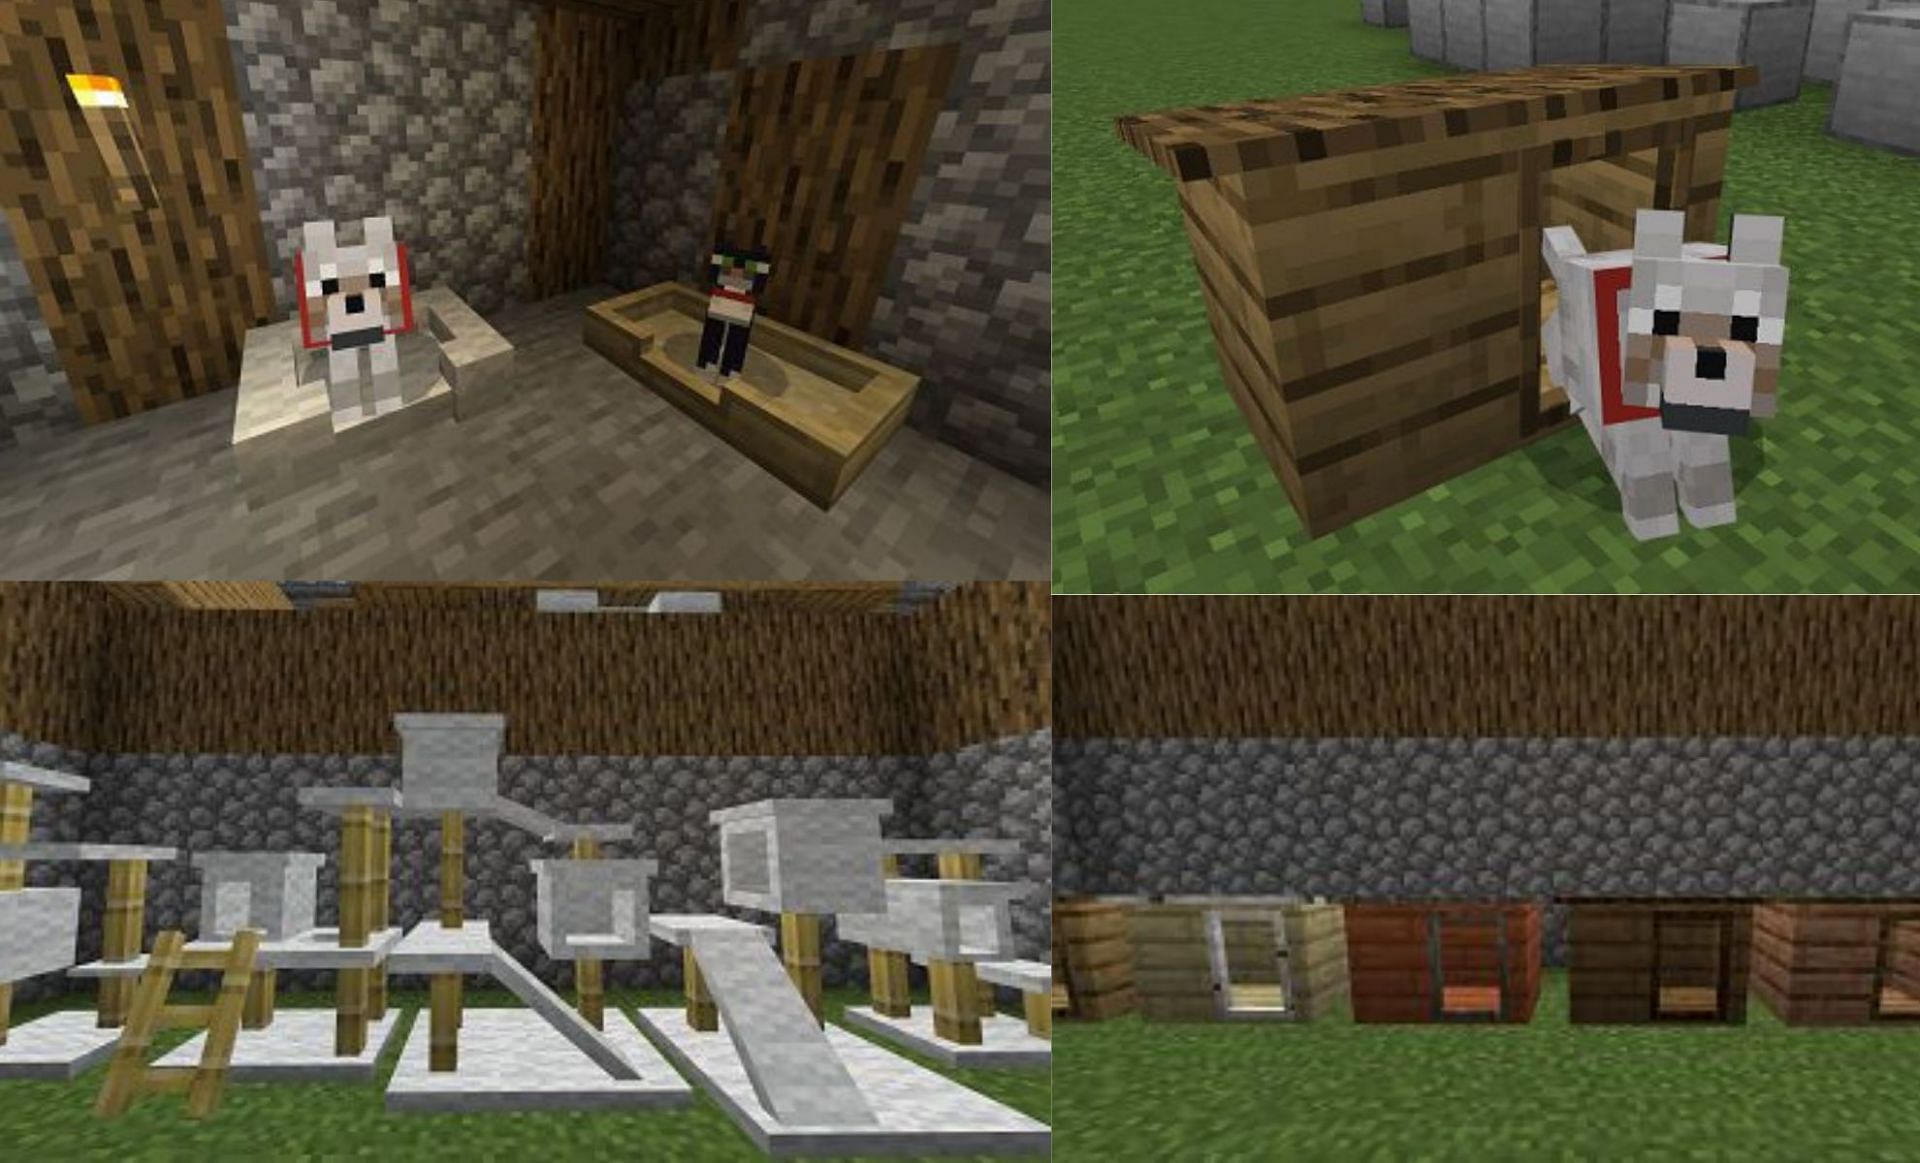 The Pet Furniture V3 add-on (Images via MCPEDL)